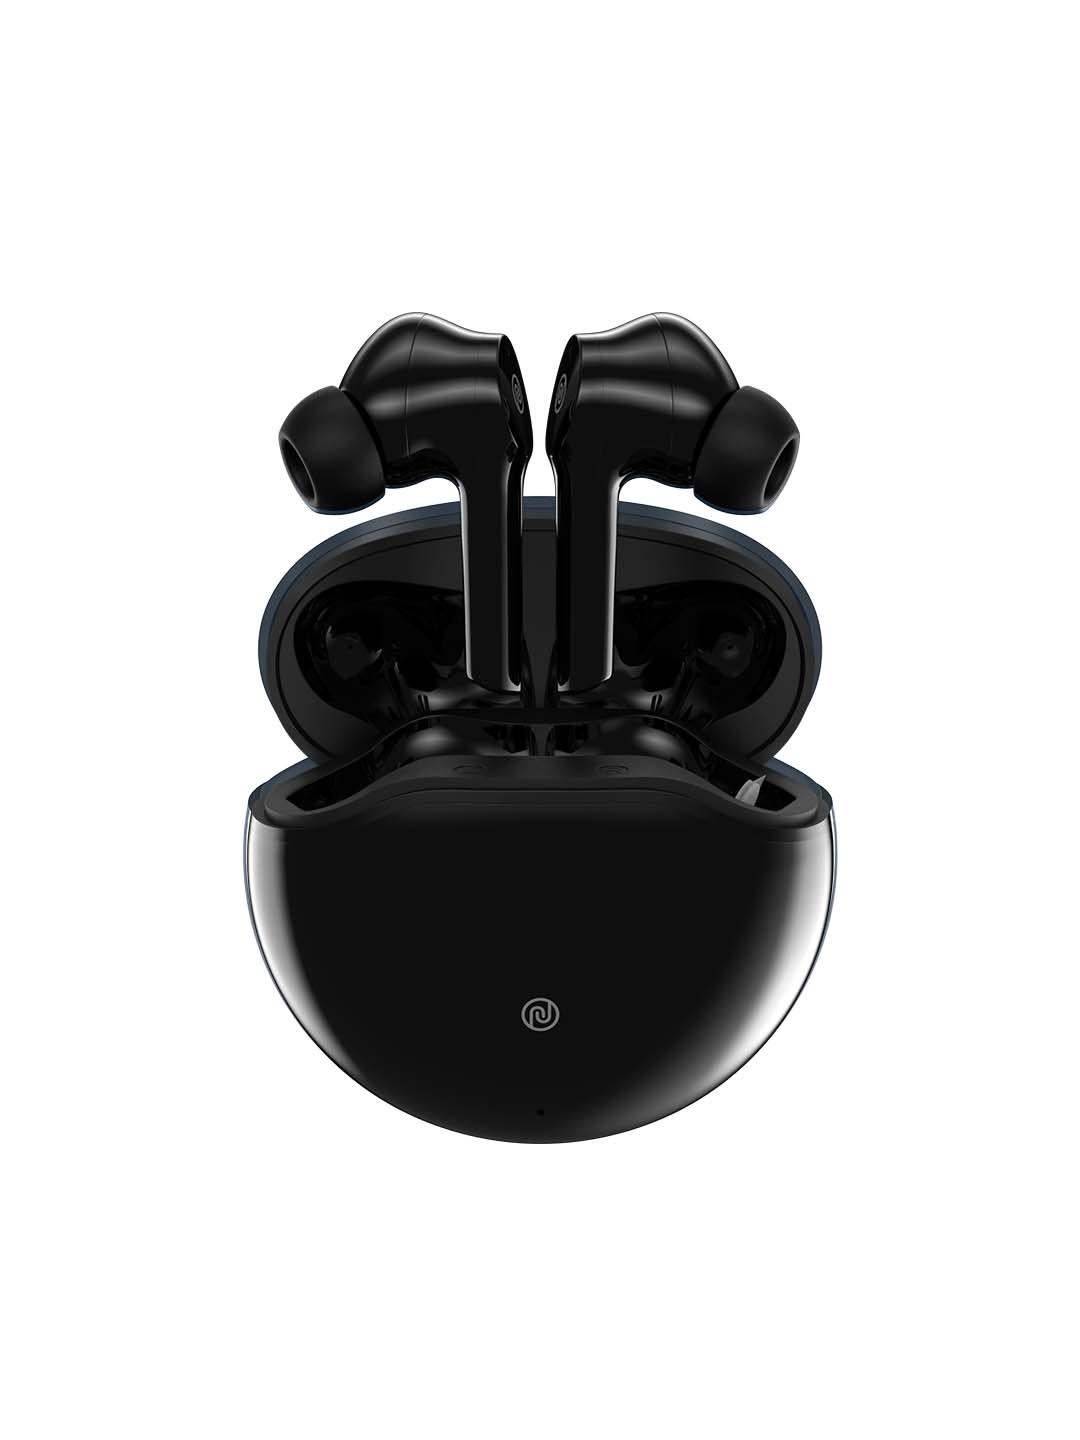 NOISE Buds VS303 Truly Wireless Earbuds with 24hrs playtime and HyperSync - Jet Black